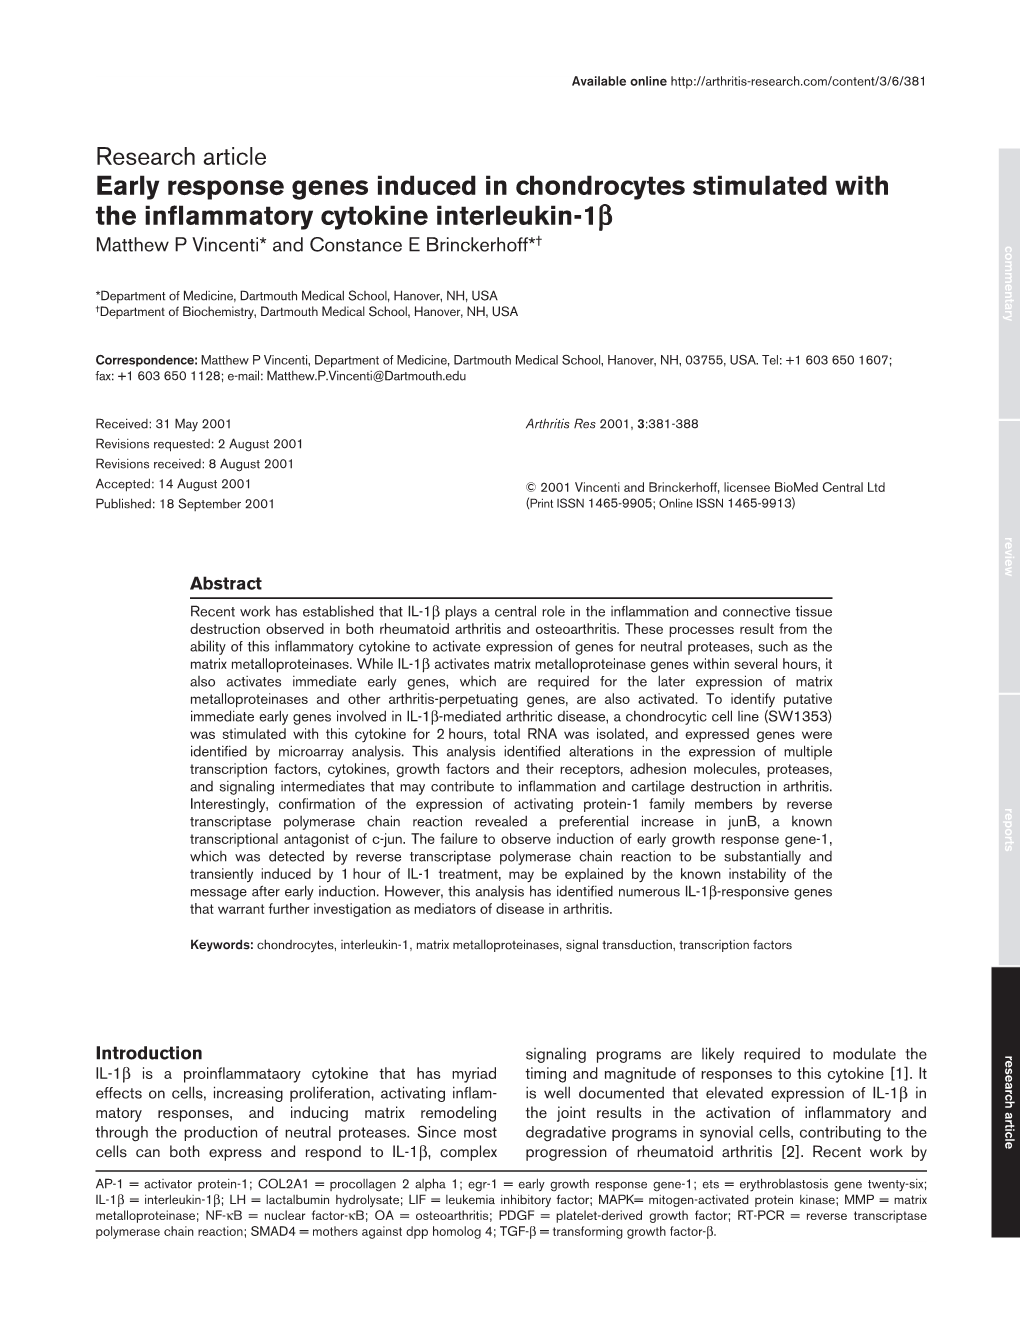 Early Response Genes Induced in Chondrocytes Stimulated with The